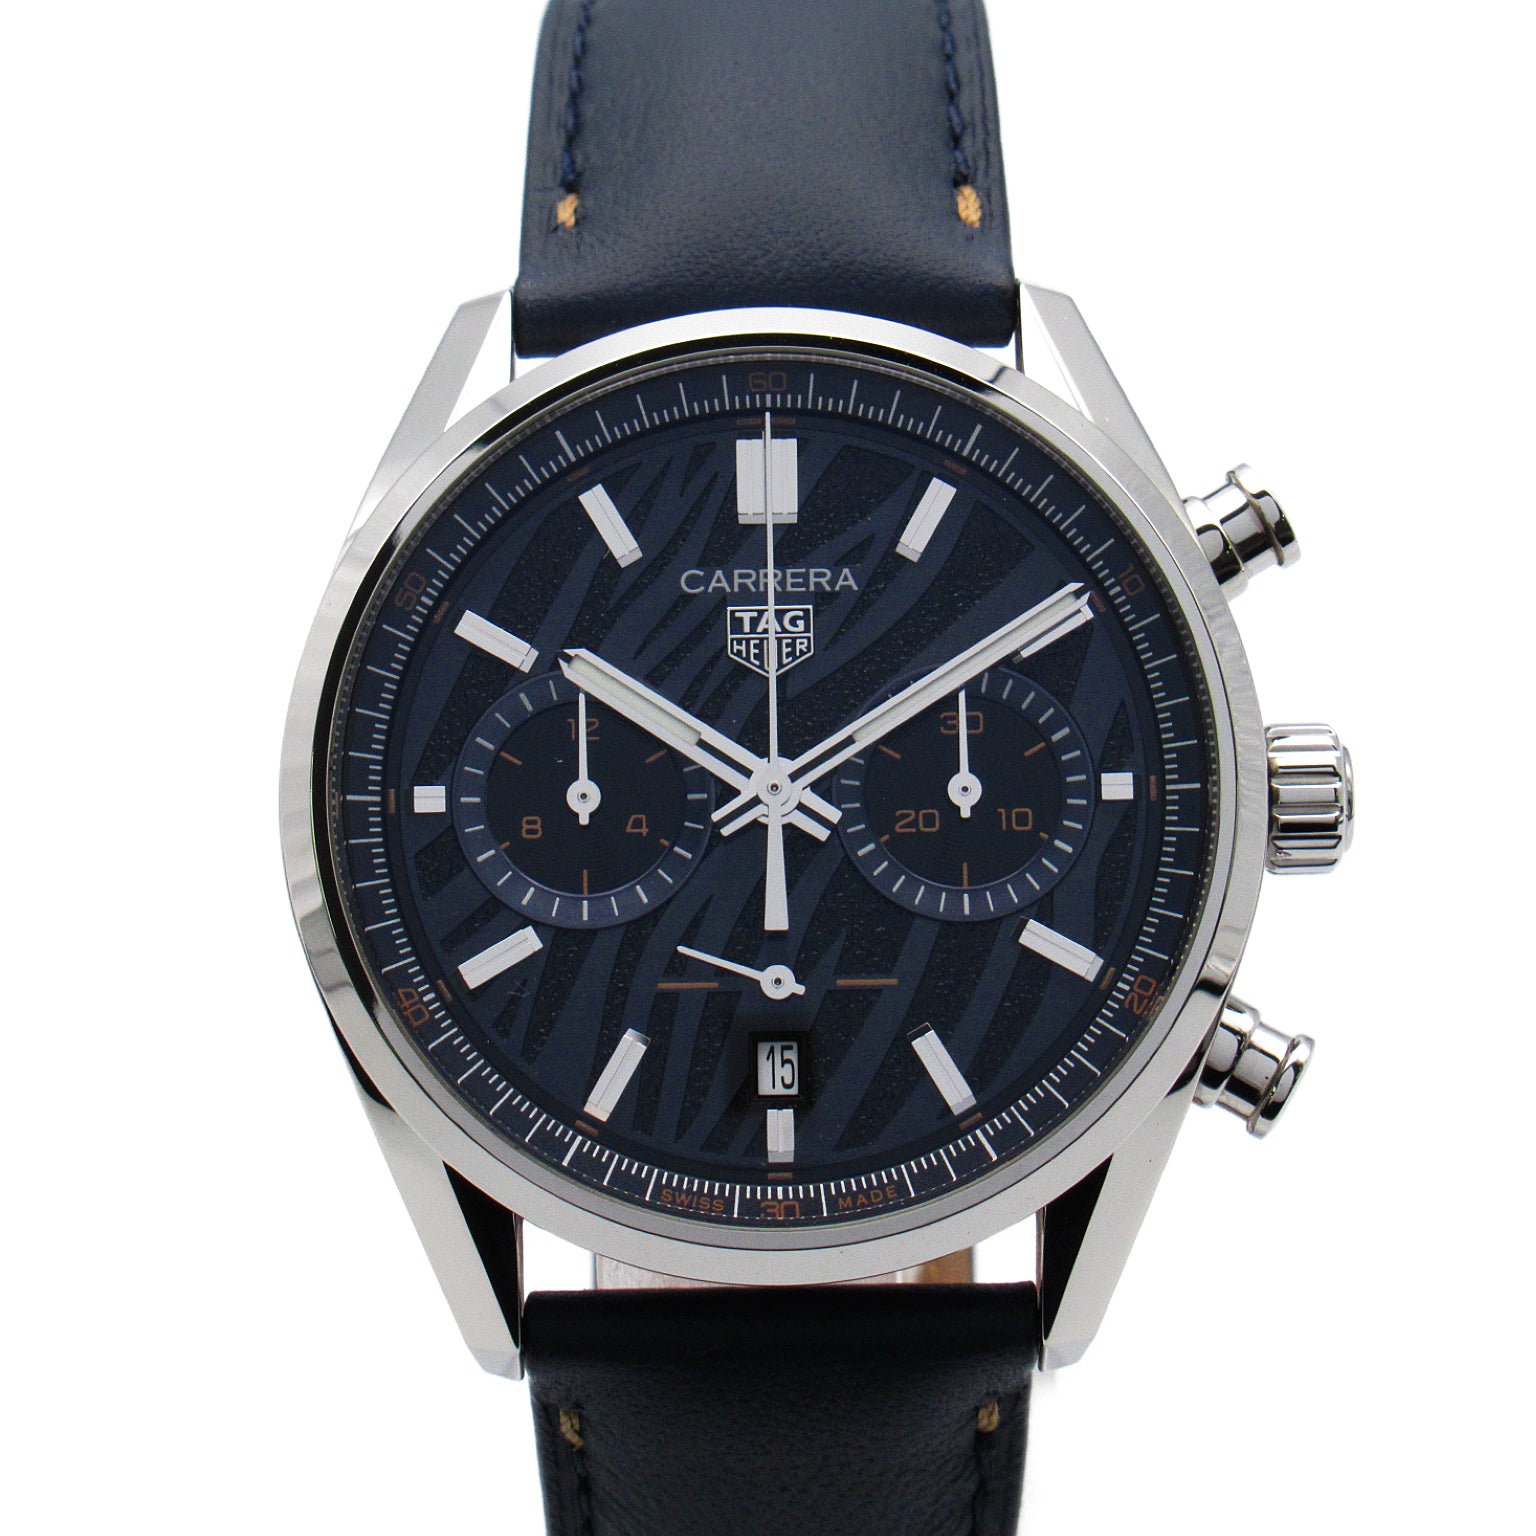 TAG HEUER Carrera Chronograph TOMIYA Limited Edition  Watch Stainless Steel Leather Belt Men Blue / Black CBN201A